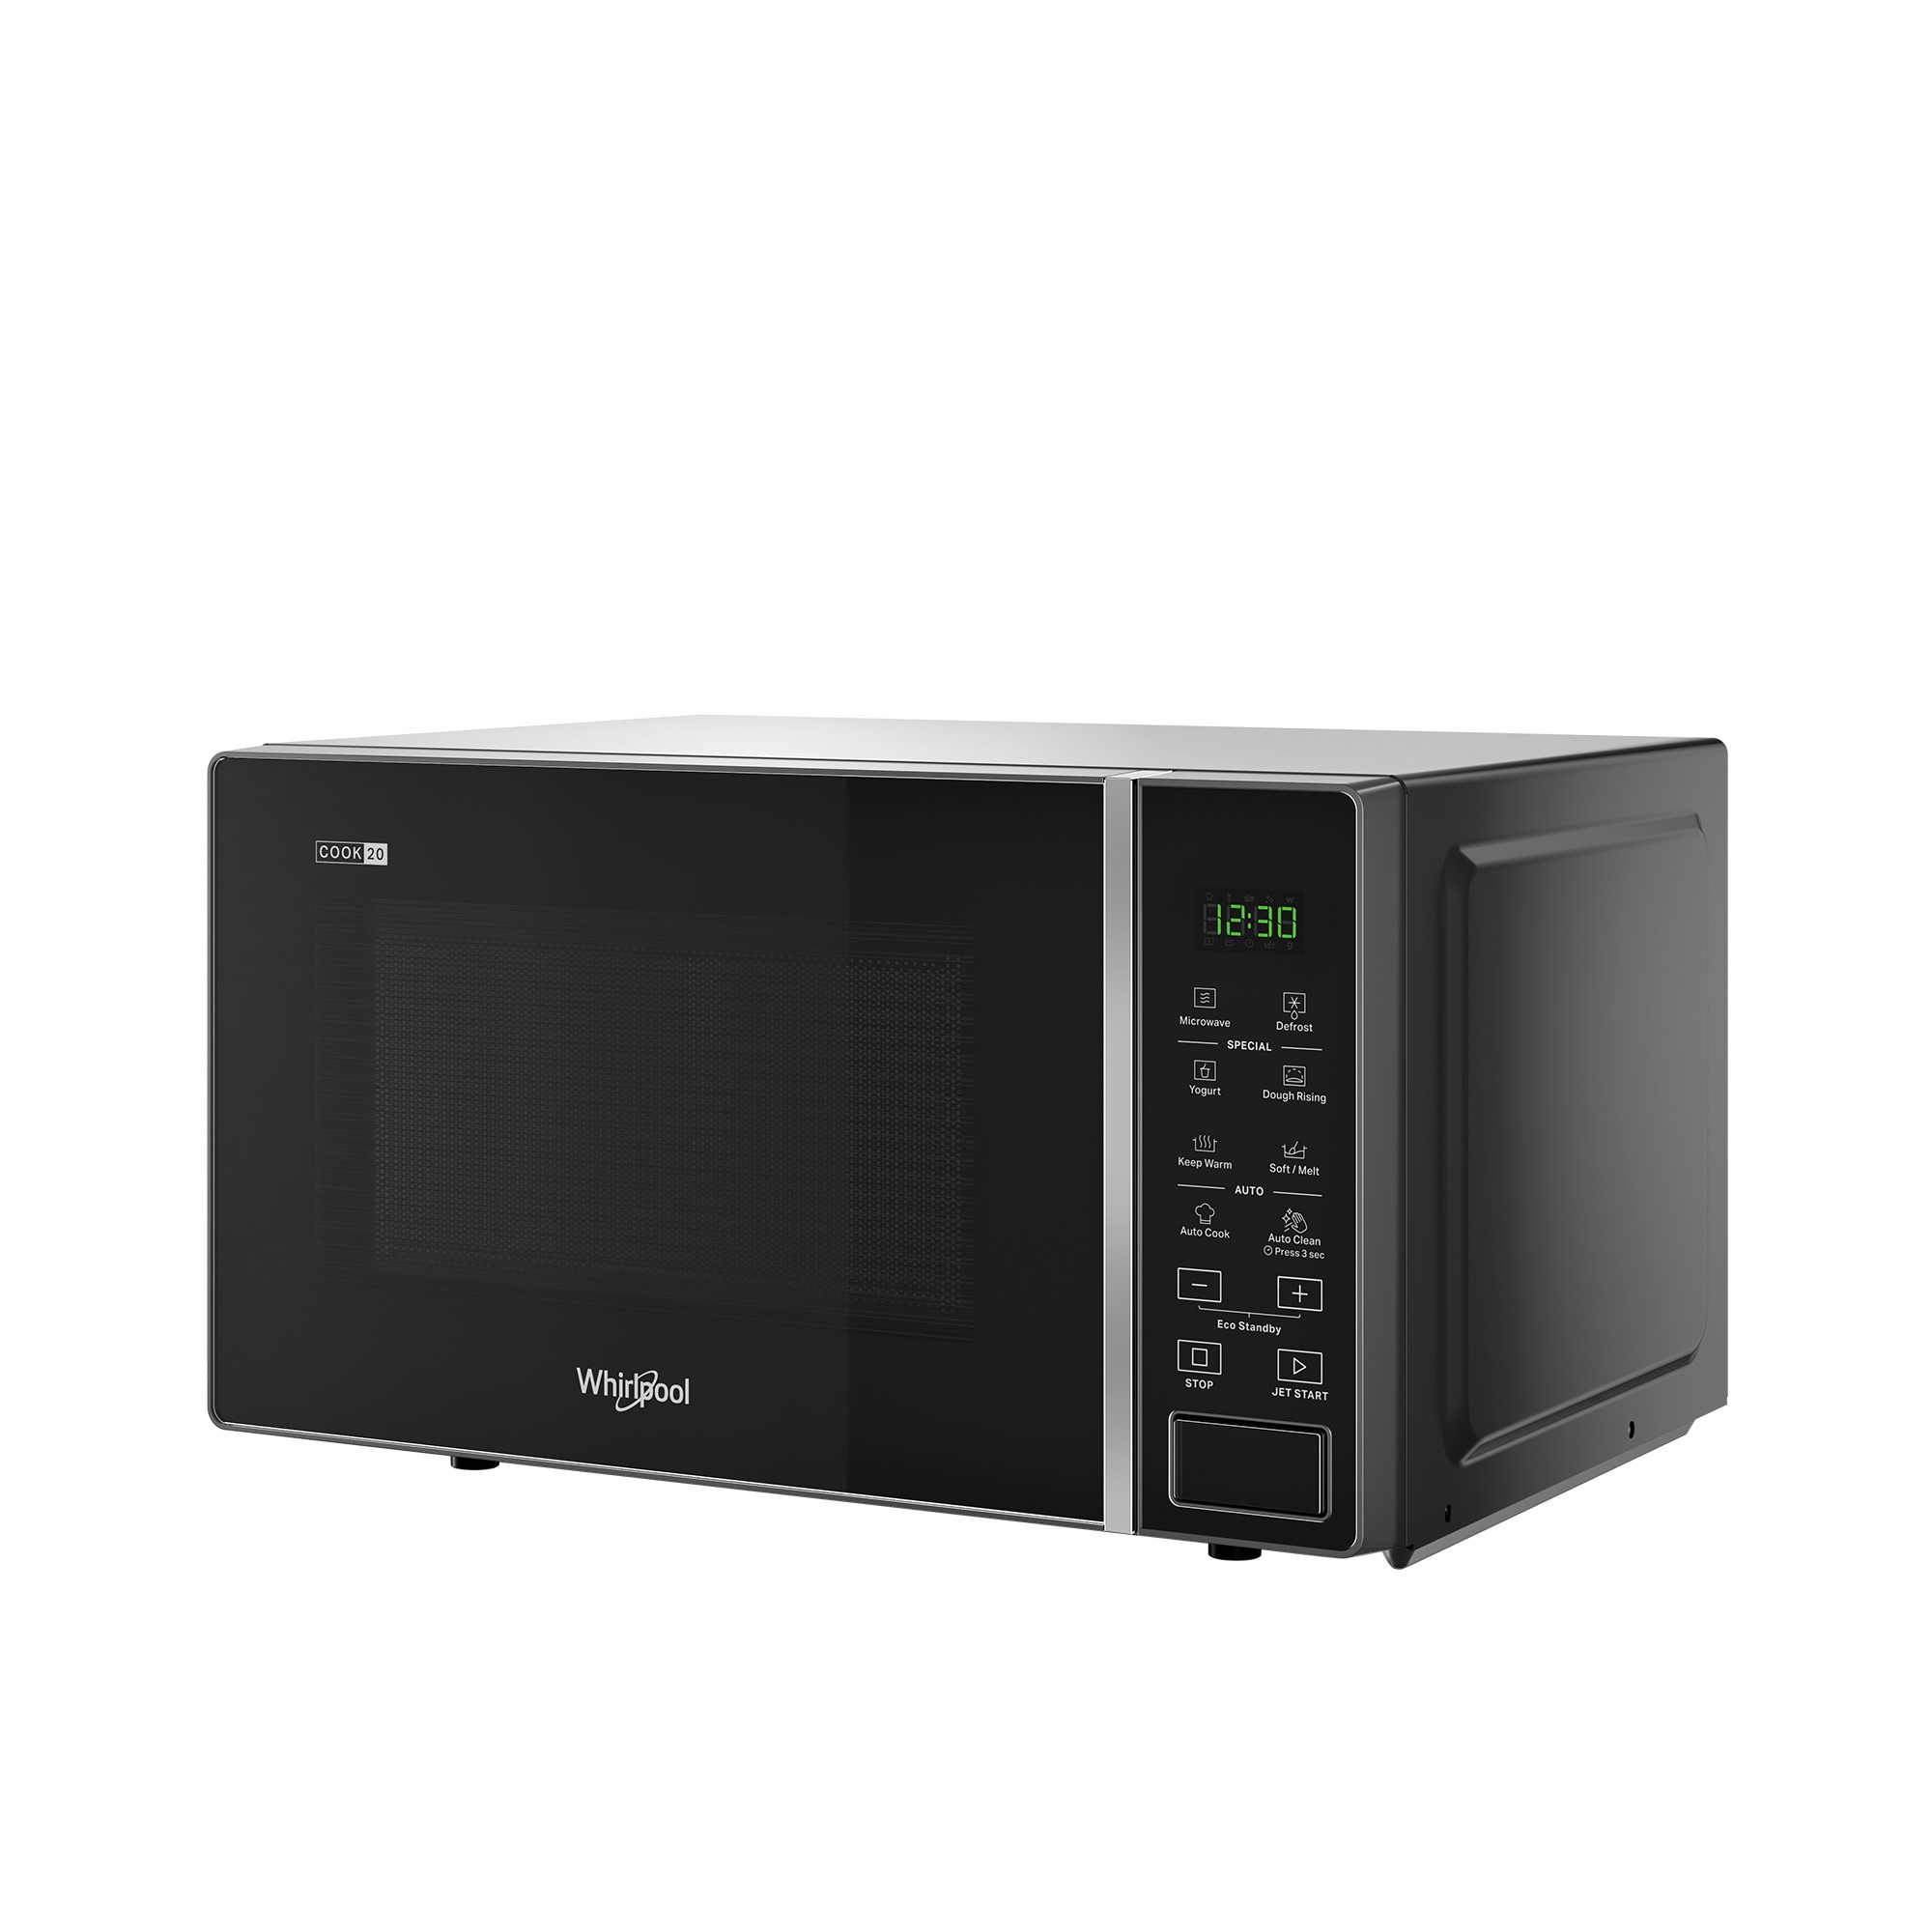 Whirlpool Microwave Oven 20L Black Image 1